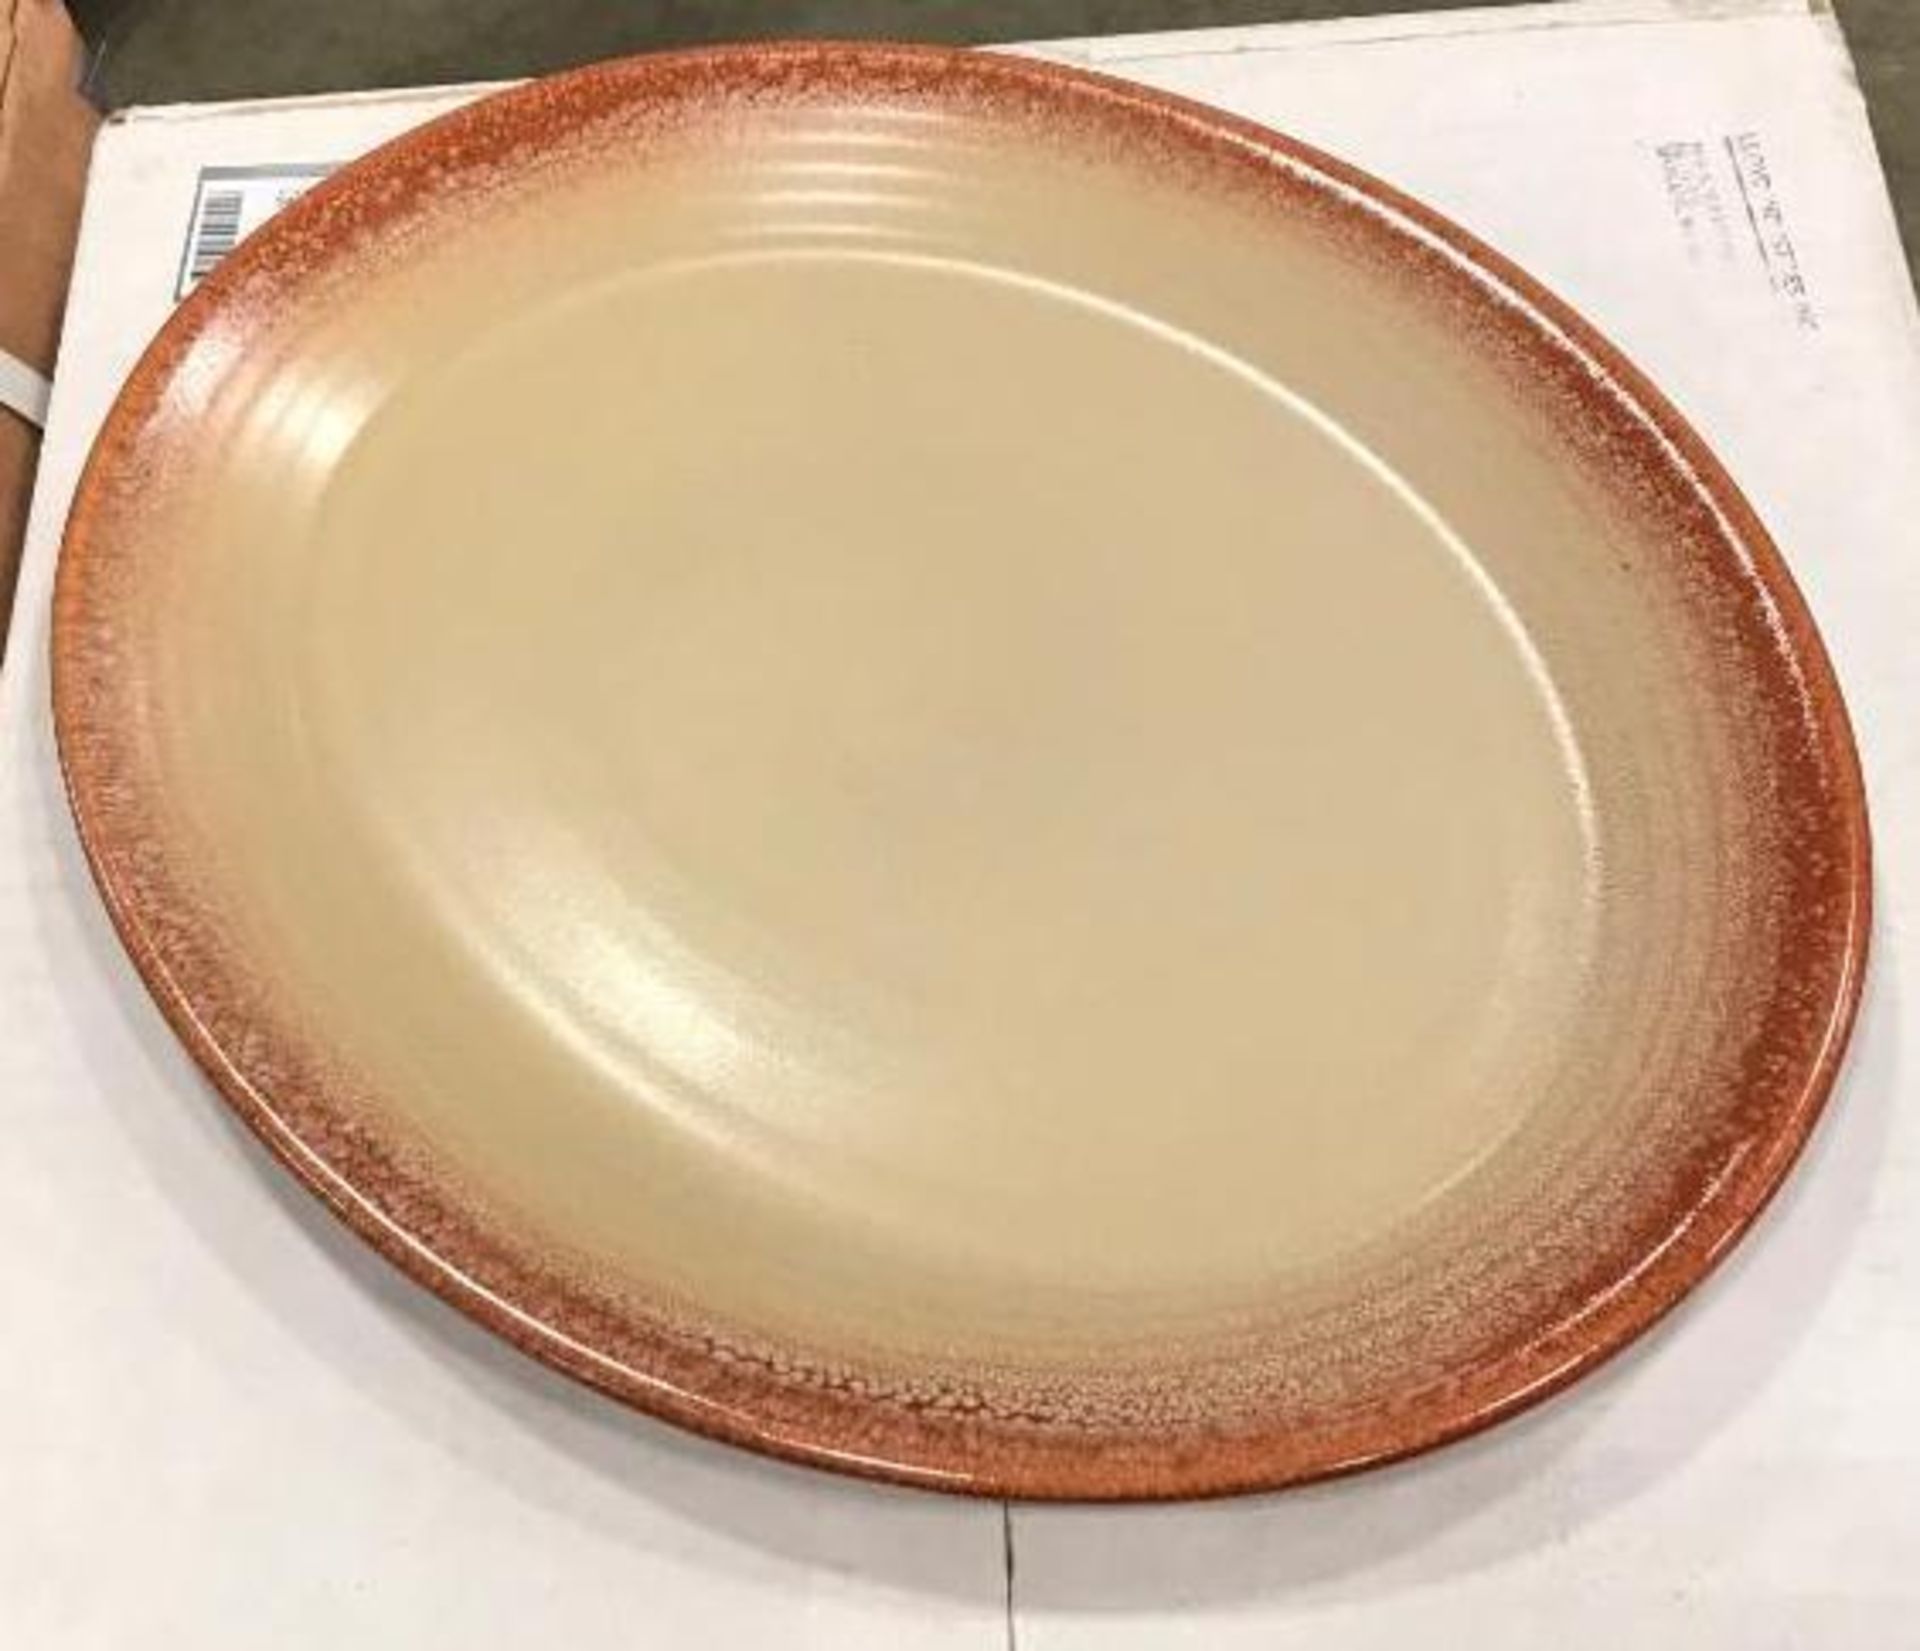 2 CASES OF DUDSON TERRACOTTA & SAND 11 1/4" OVAL PLATE - 12/CASE, MADE IN ENGLAND - Image 2 of 5